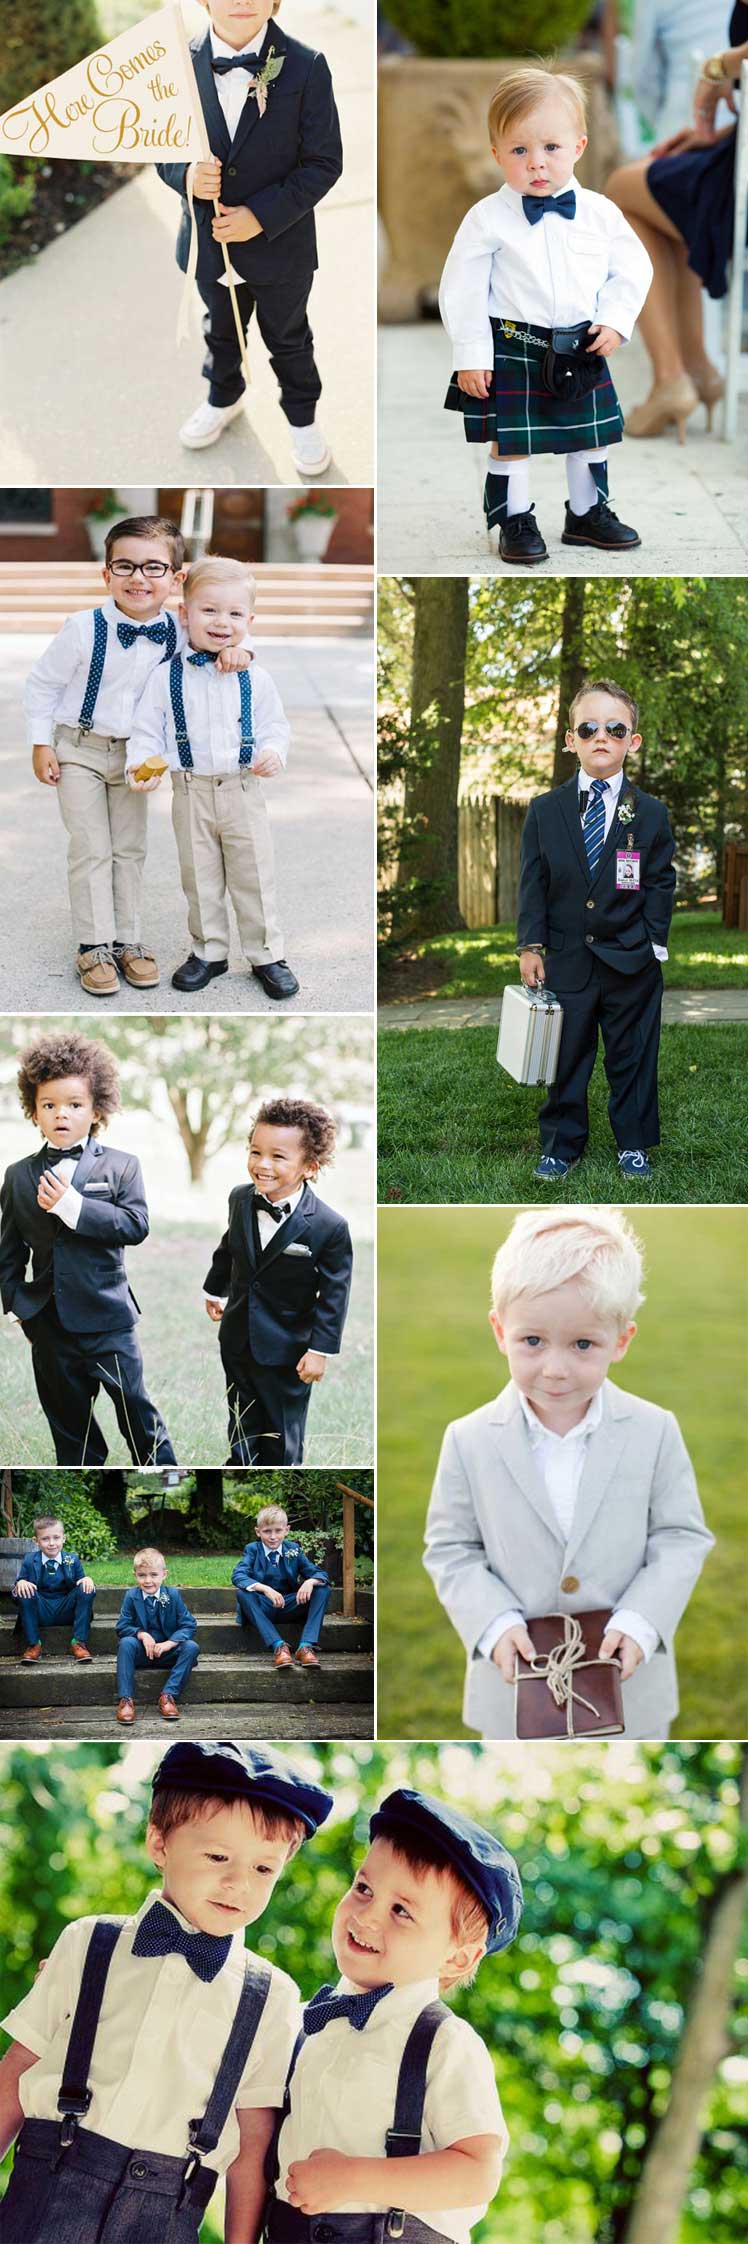 Ring Bearer and Flower Girl 101: Your Questions Answered! — Jennings Trace